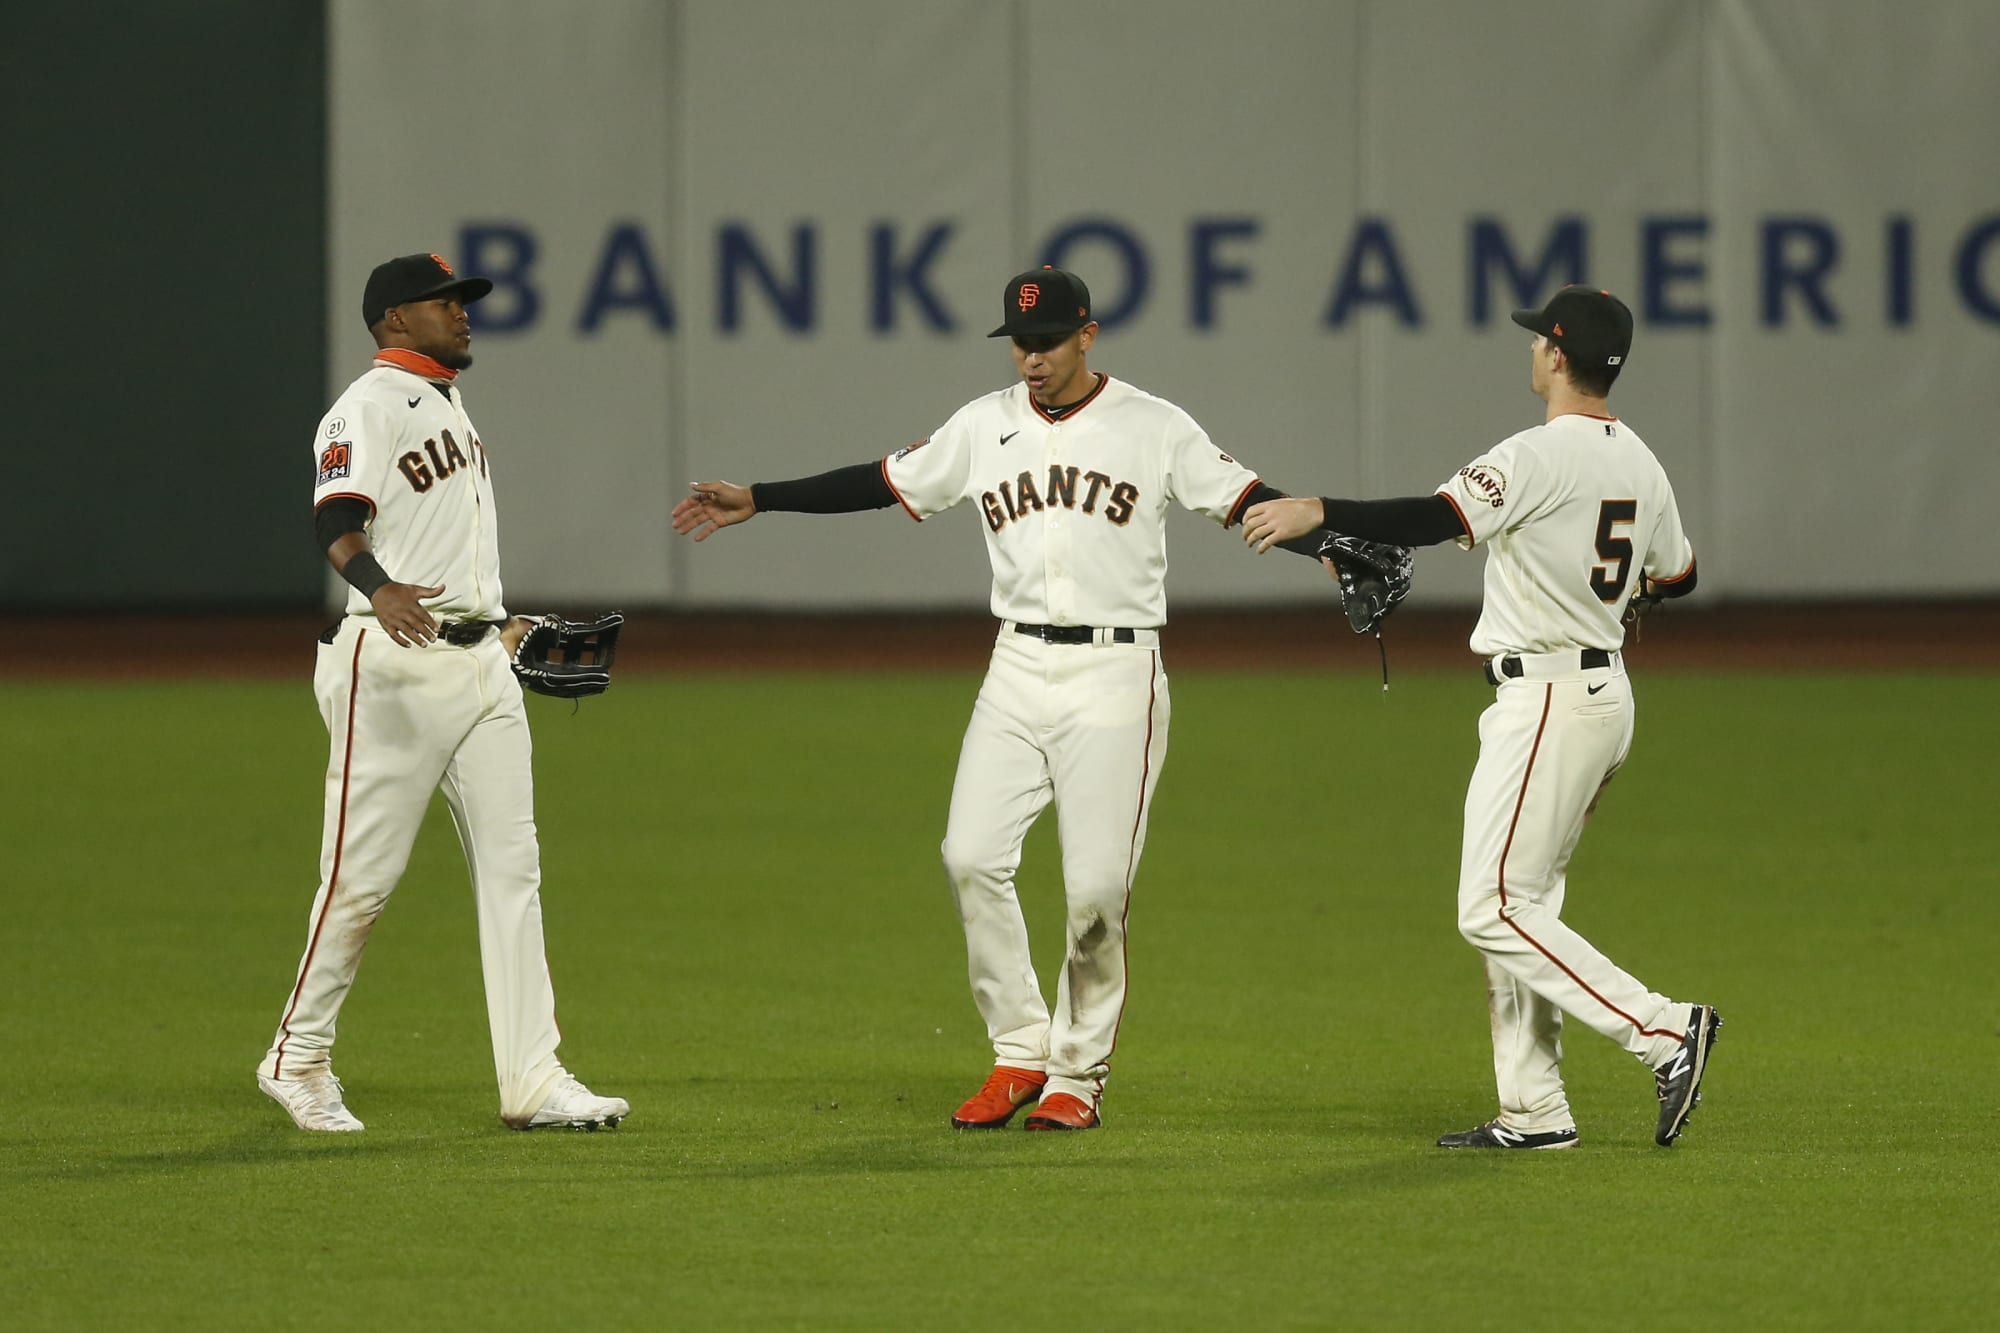 SF Giants' games postponed after player tests positive for COVID-19